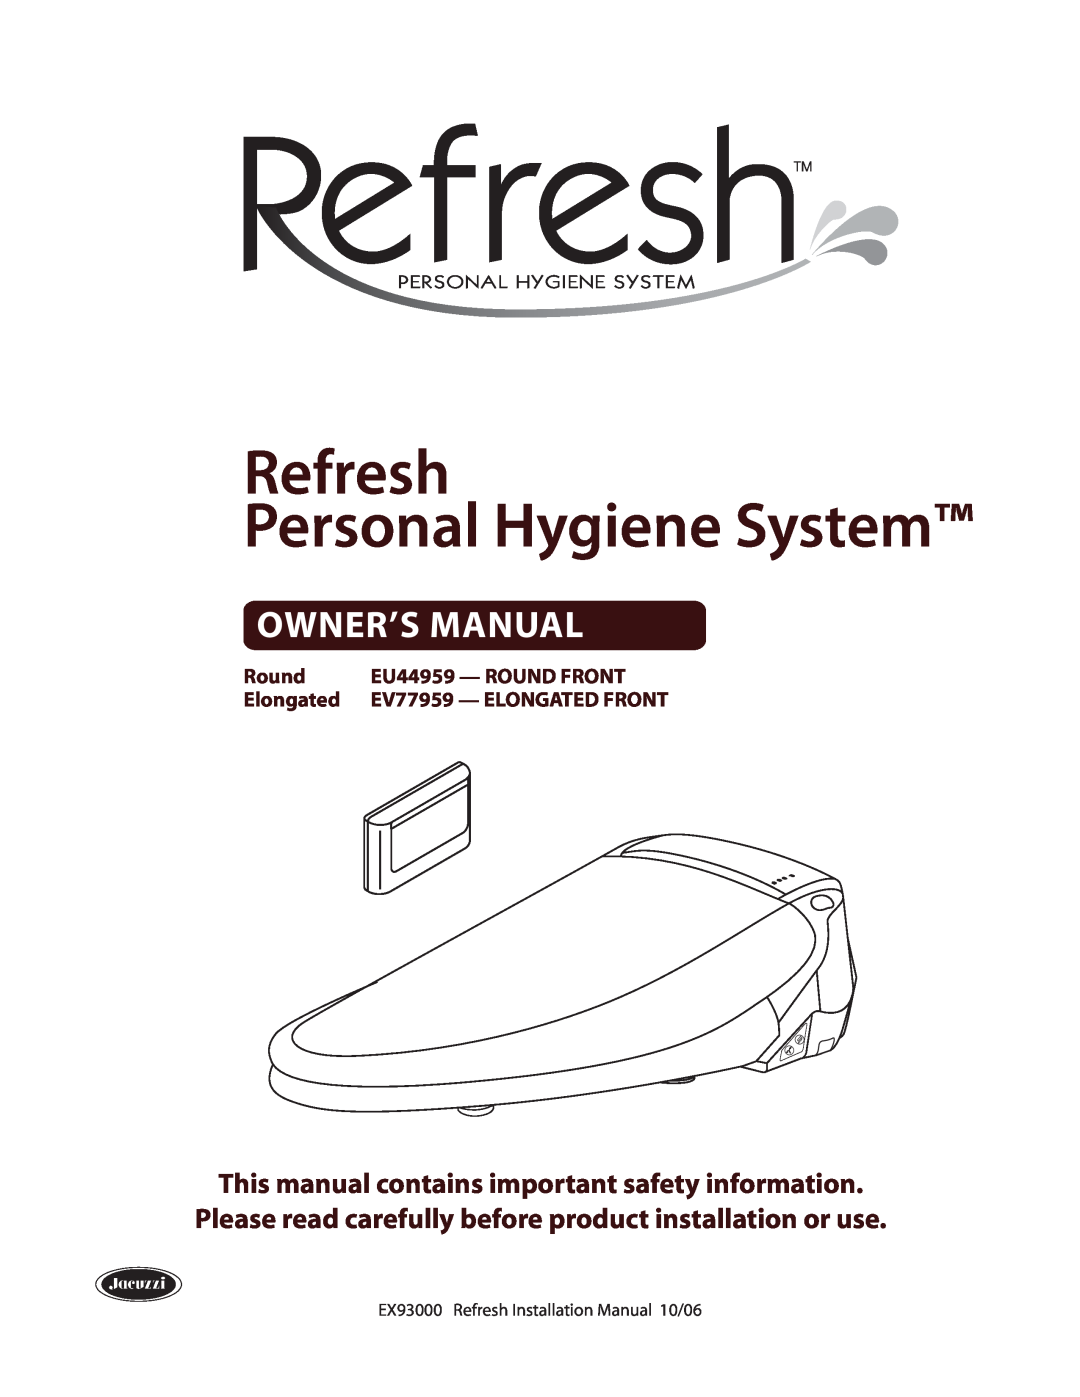 Jacuzzi EV77959 owner manual Refresh, Personal Hygiene System, Round, EU44959 - ROUND FRONT, Elongated 